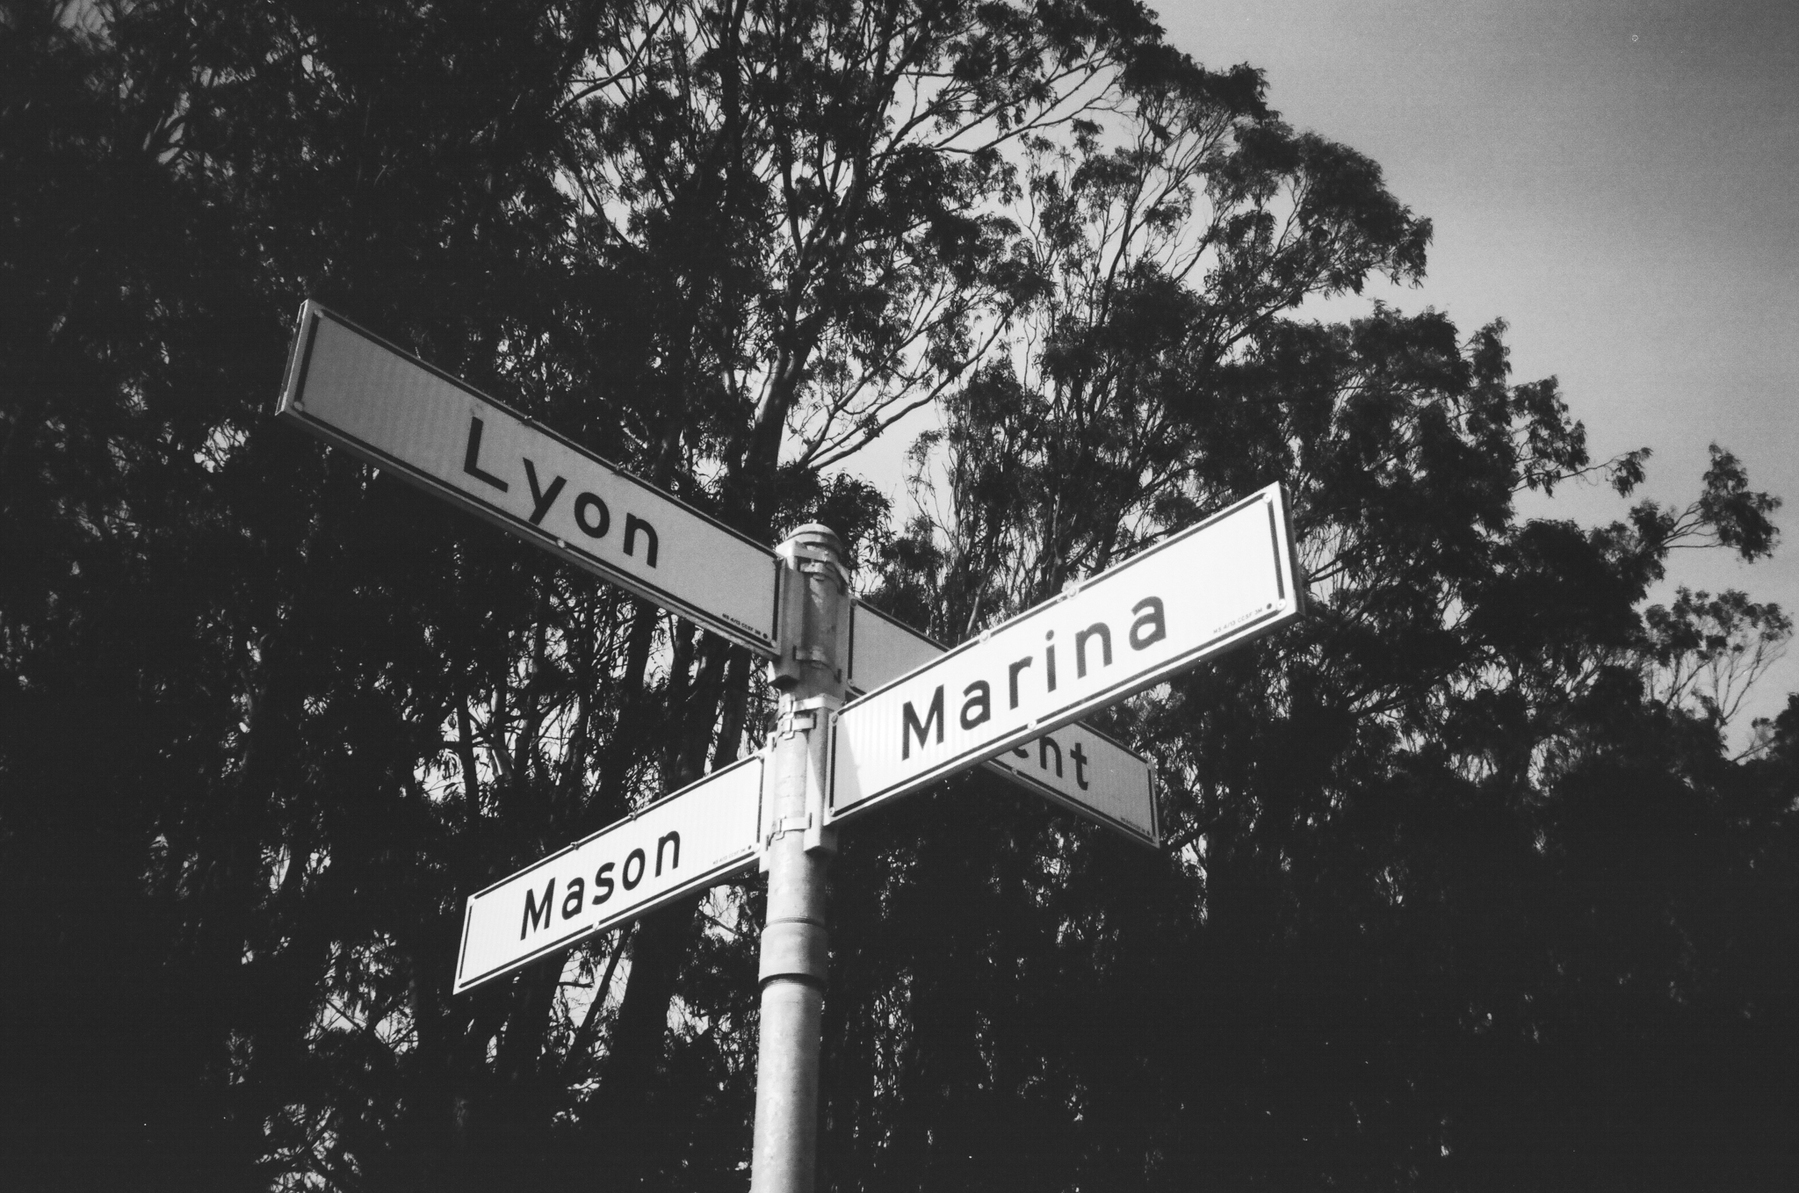 a black and white photograph of some signs that say Lyon, Marina and Mason in front of some trees